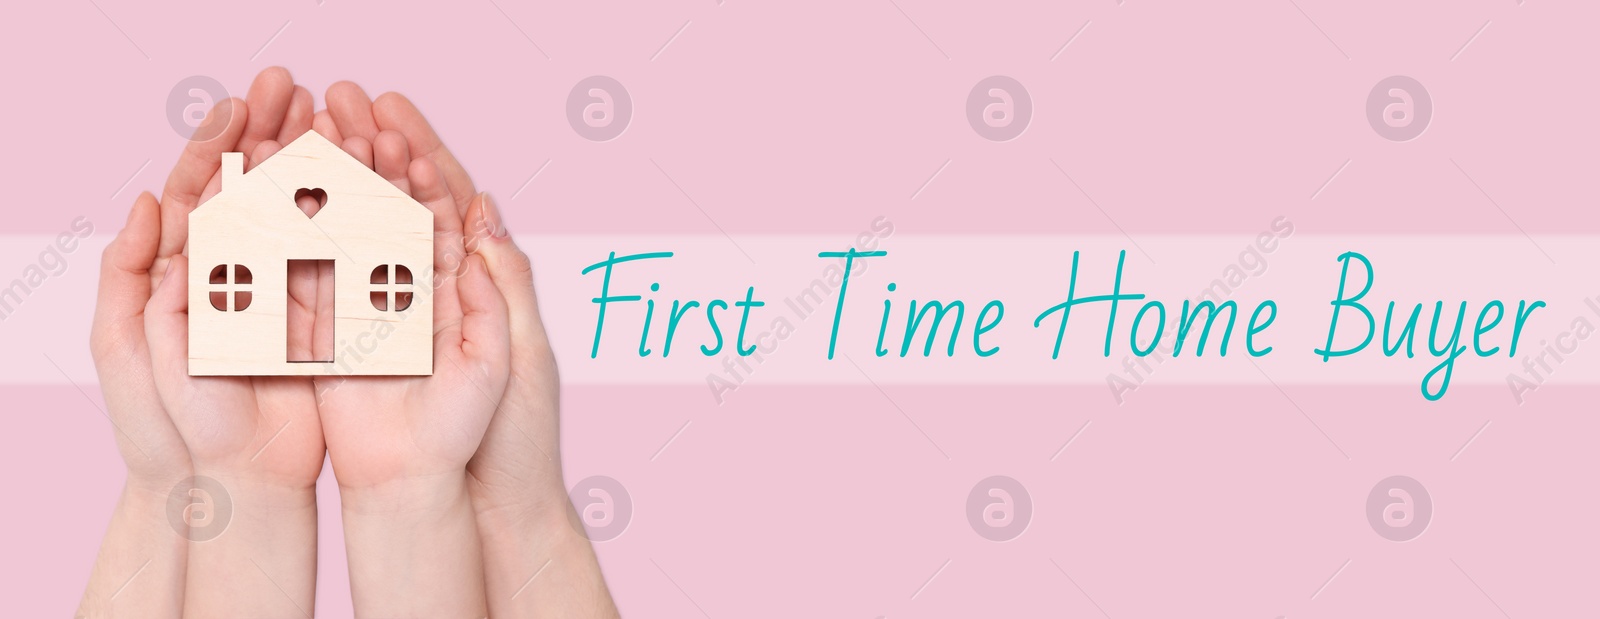 Image of First time home buyer. Woman with her child holding house figure on pink background, top view. Banner design